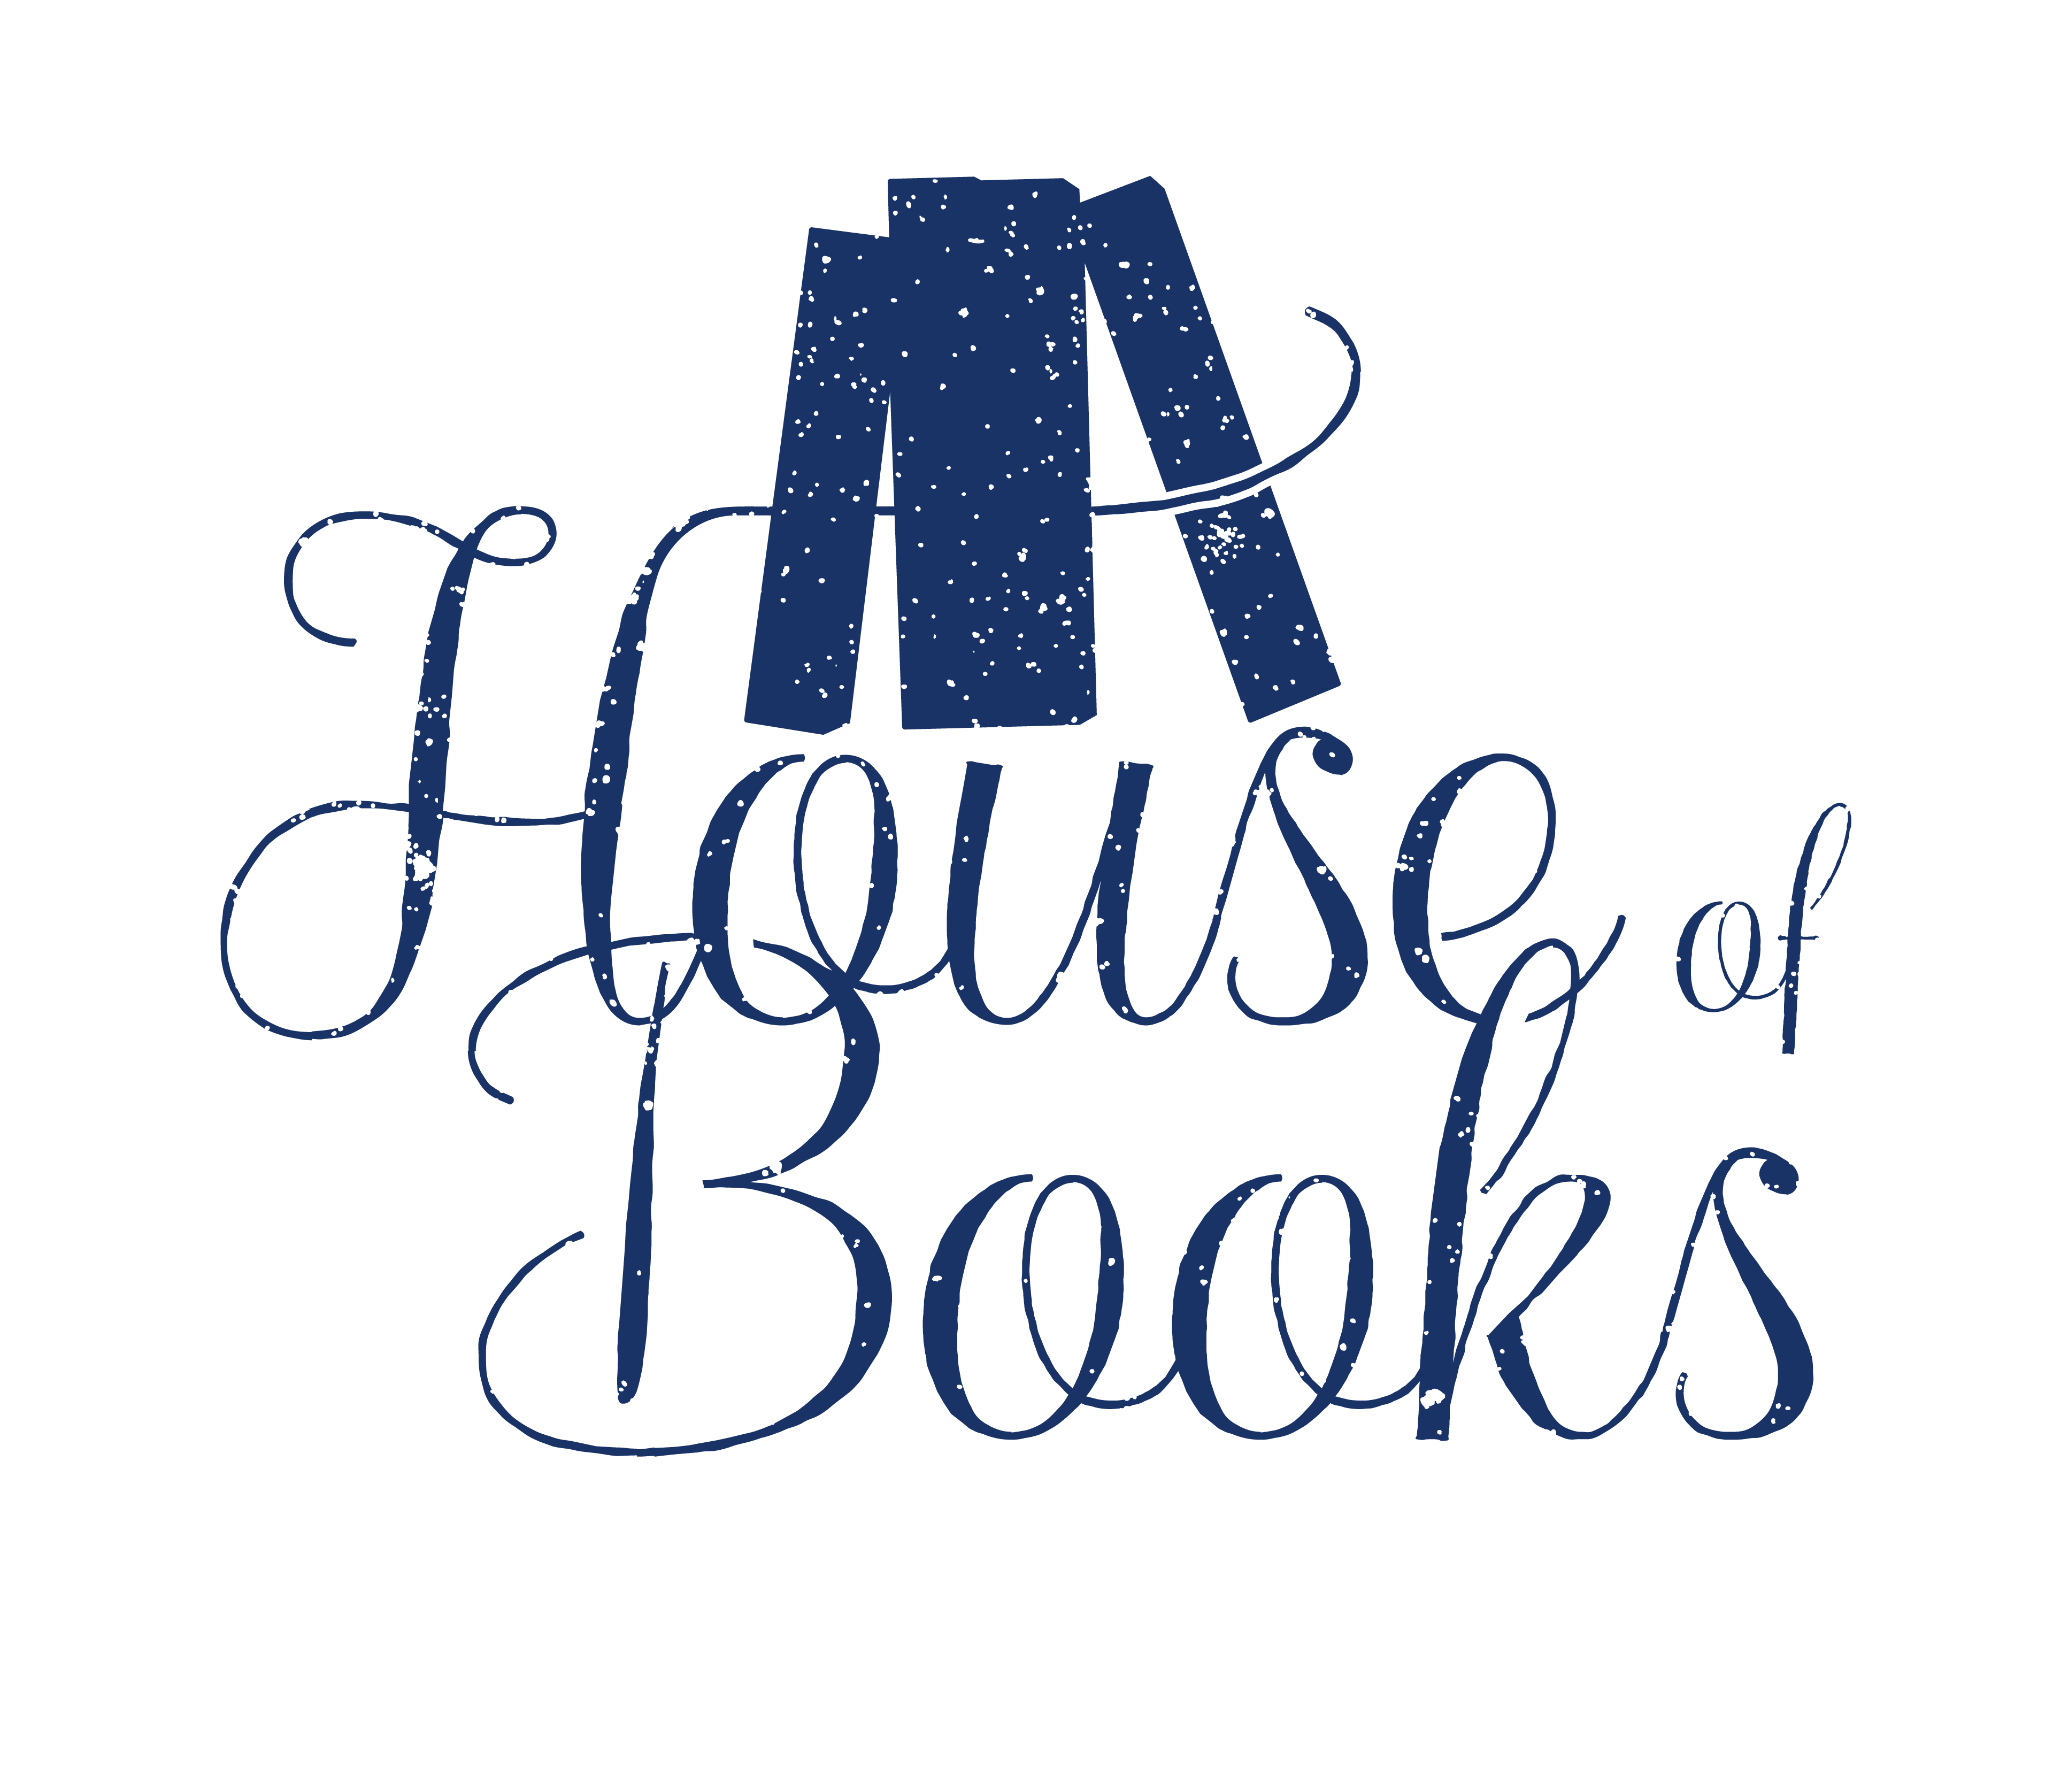 House of Books